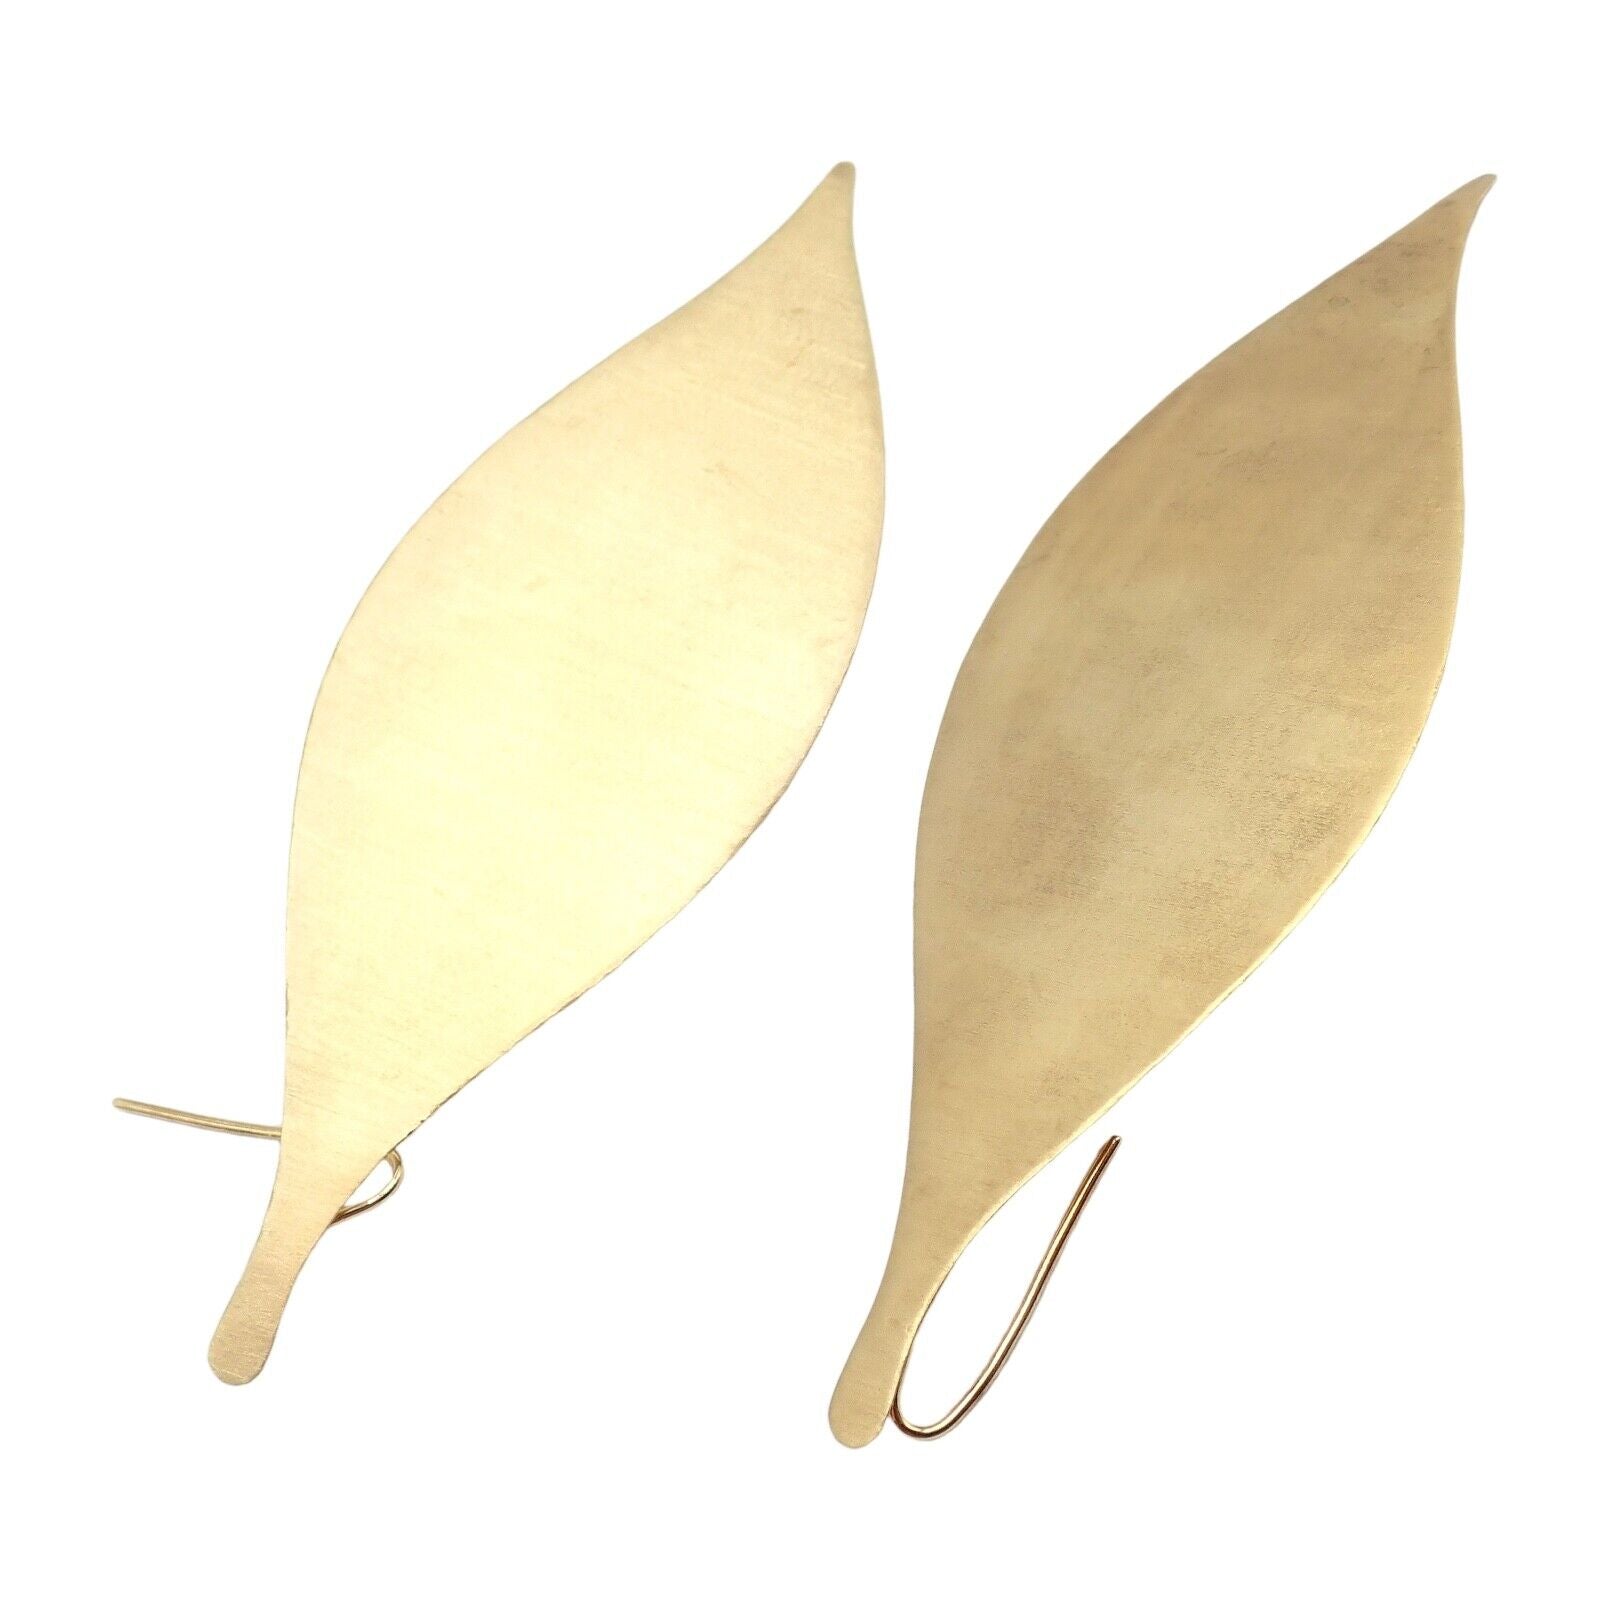 H. Stern Jewelry & Watches:Fine Jewelry:Earrings Rare Authentic H. Stern 18k Yellow Gold Large Giant Leaf Dangle Earrings